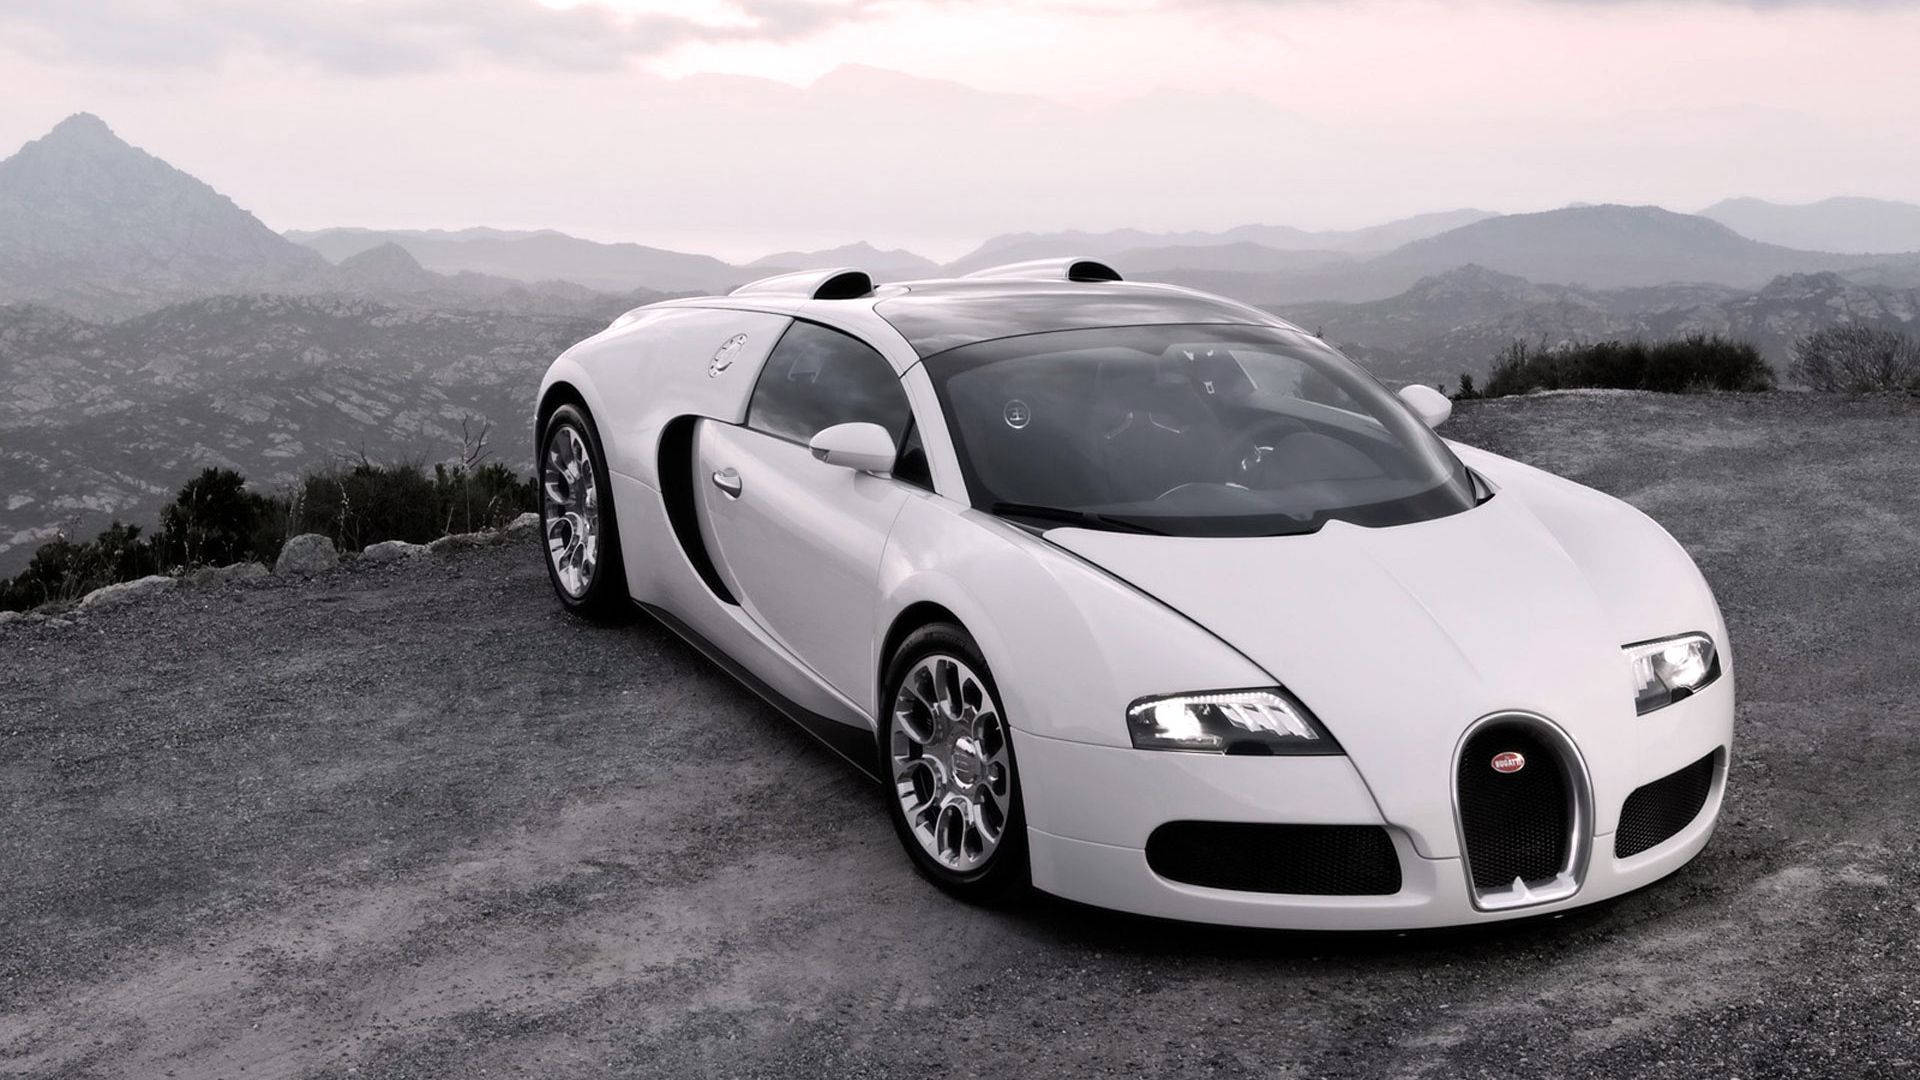 Majestic White Bugatti Veyron Outlining Perfection in the Countryside Wallpaper